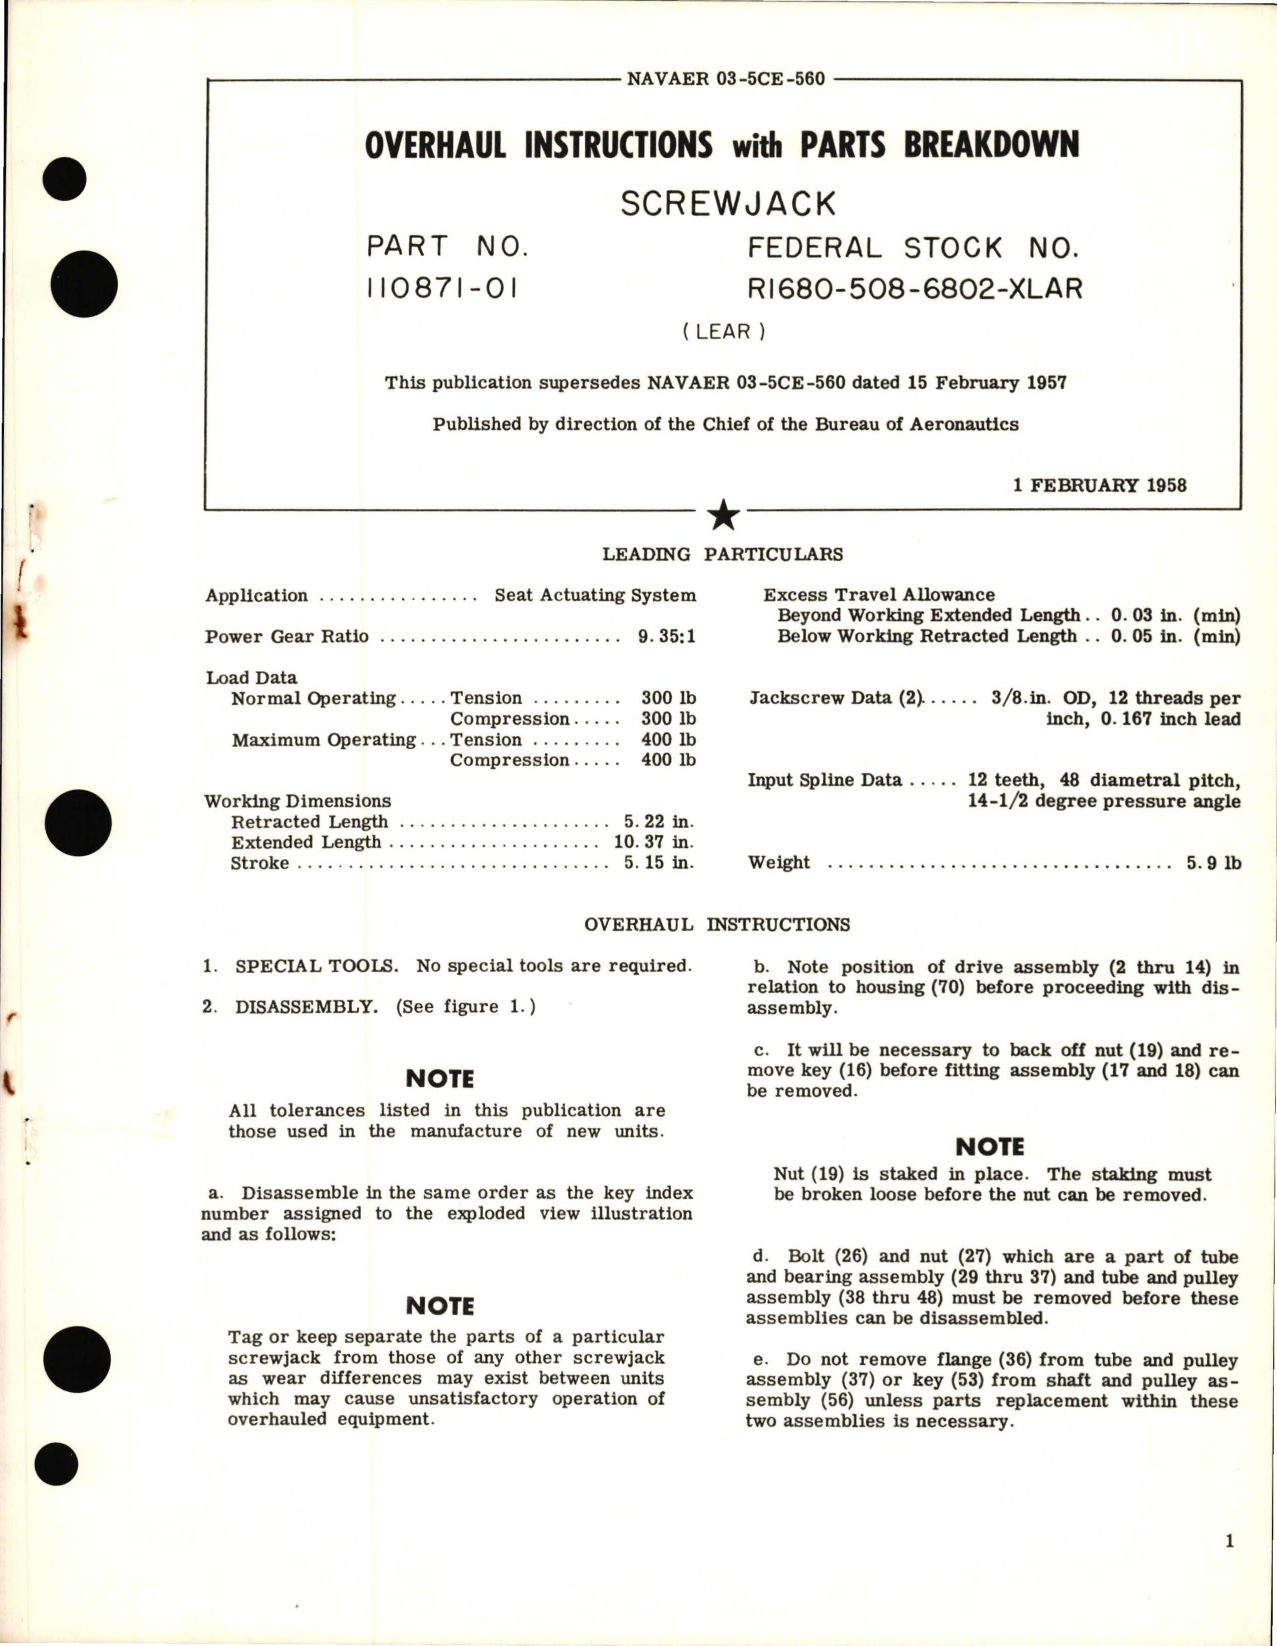 Sample page 1 from AirCorps Library document: Overhaul Instructions with Parts Breakdown for Screwjack - Part 110871-01